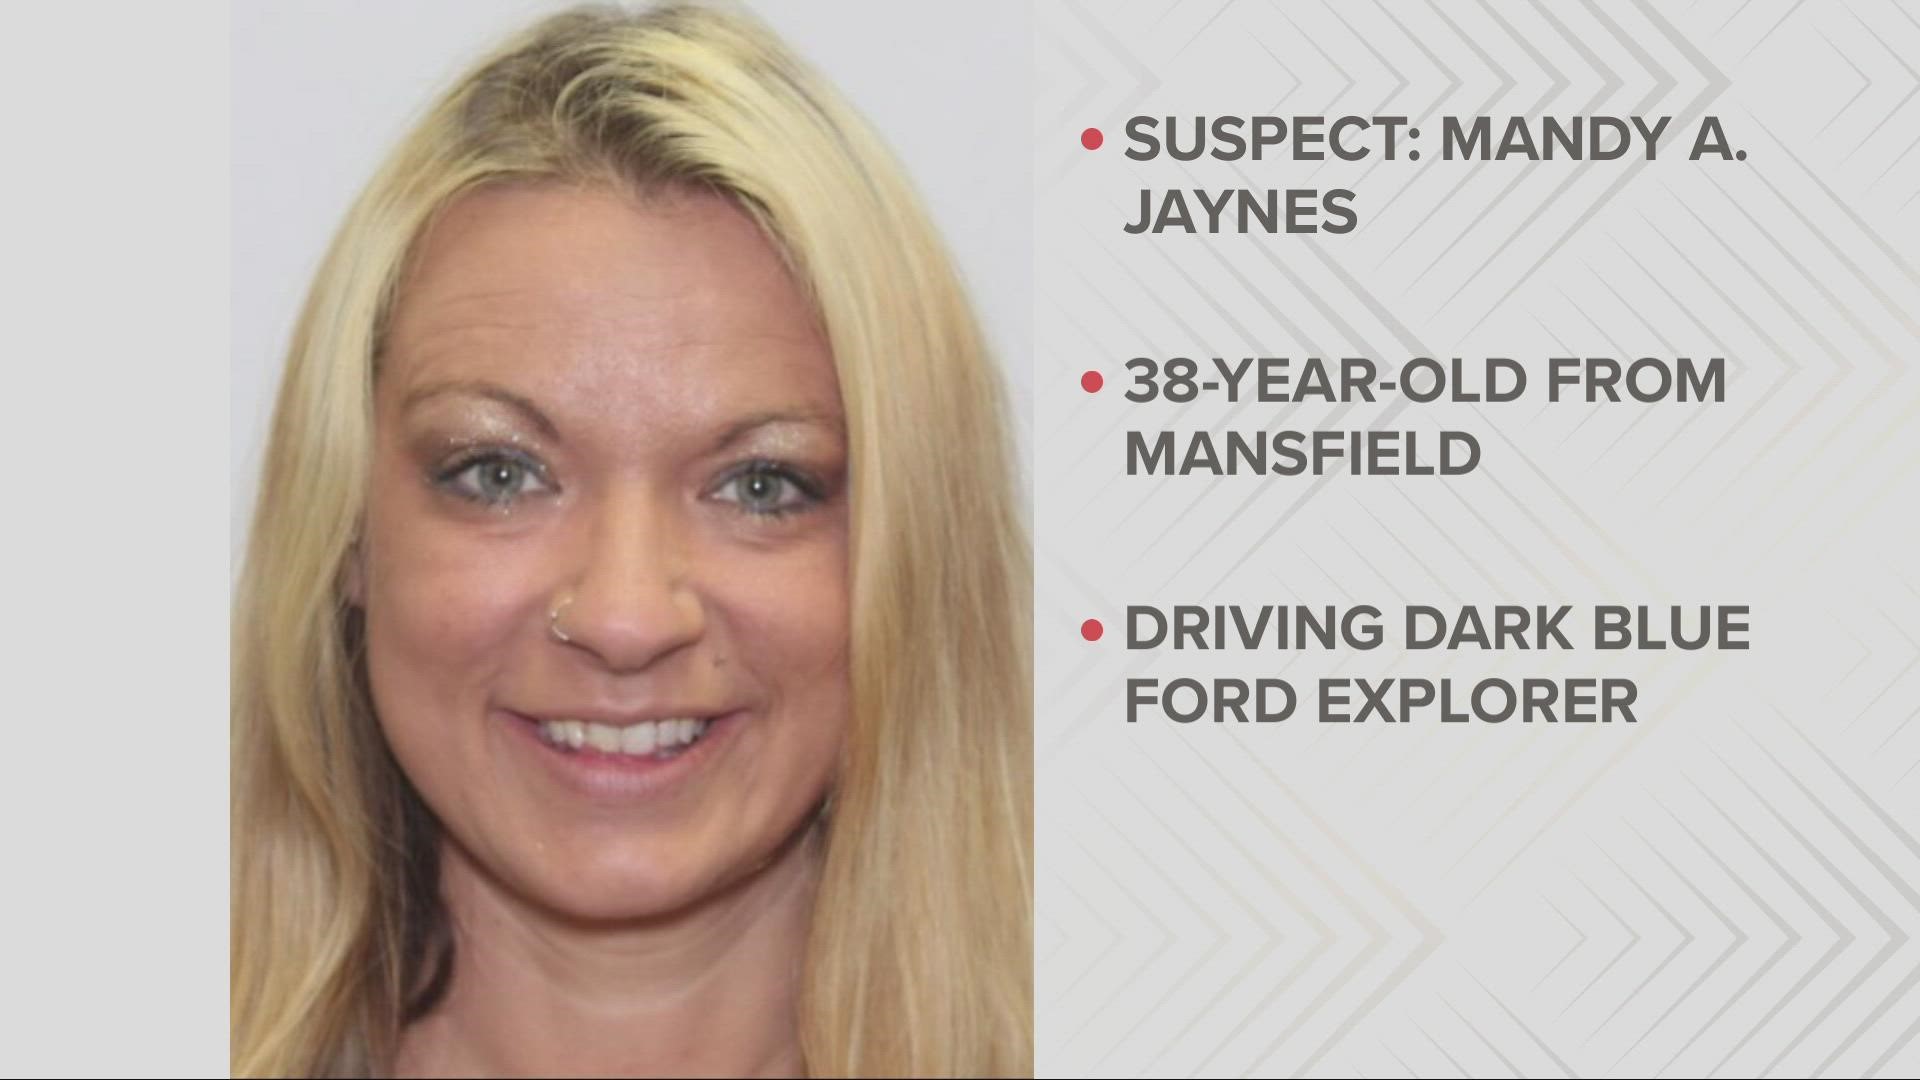 The baby, whose name was not released, was taken by 38-year-old Mandy Jaynes. Authorities say Jaynes is a known drug addict.